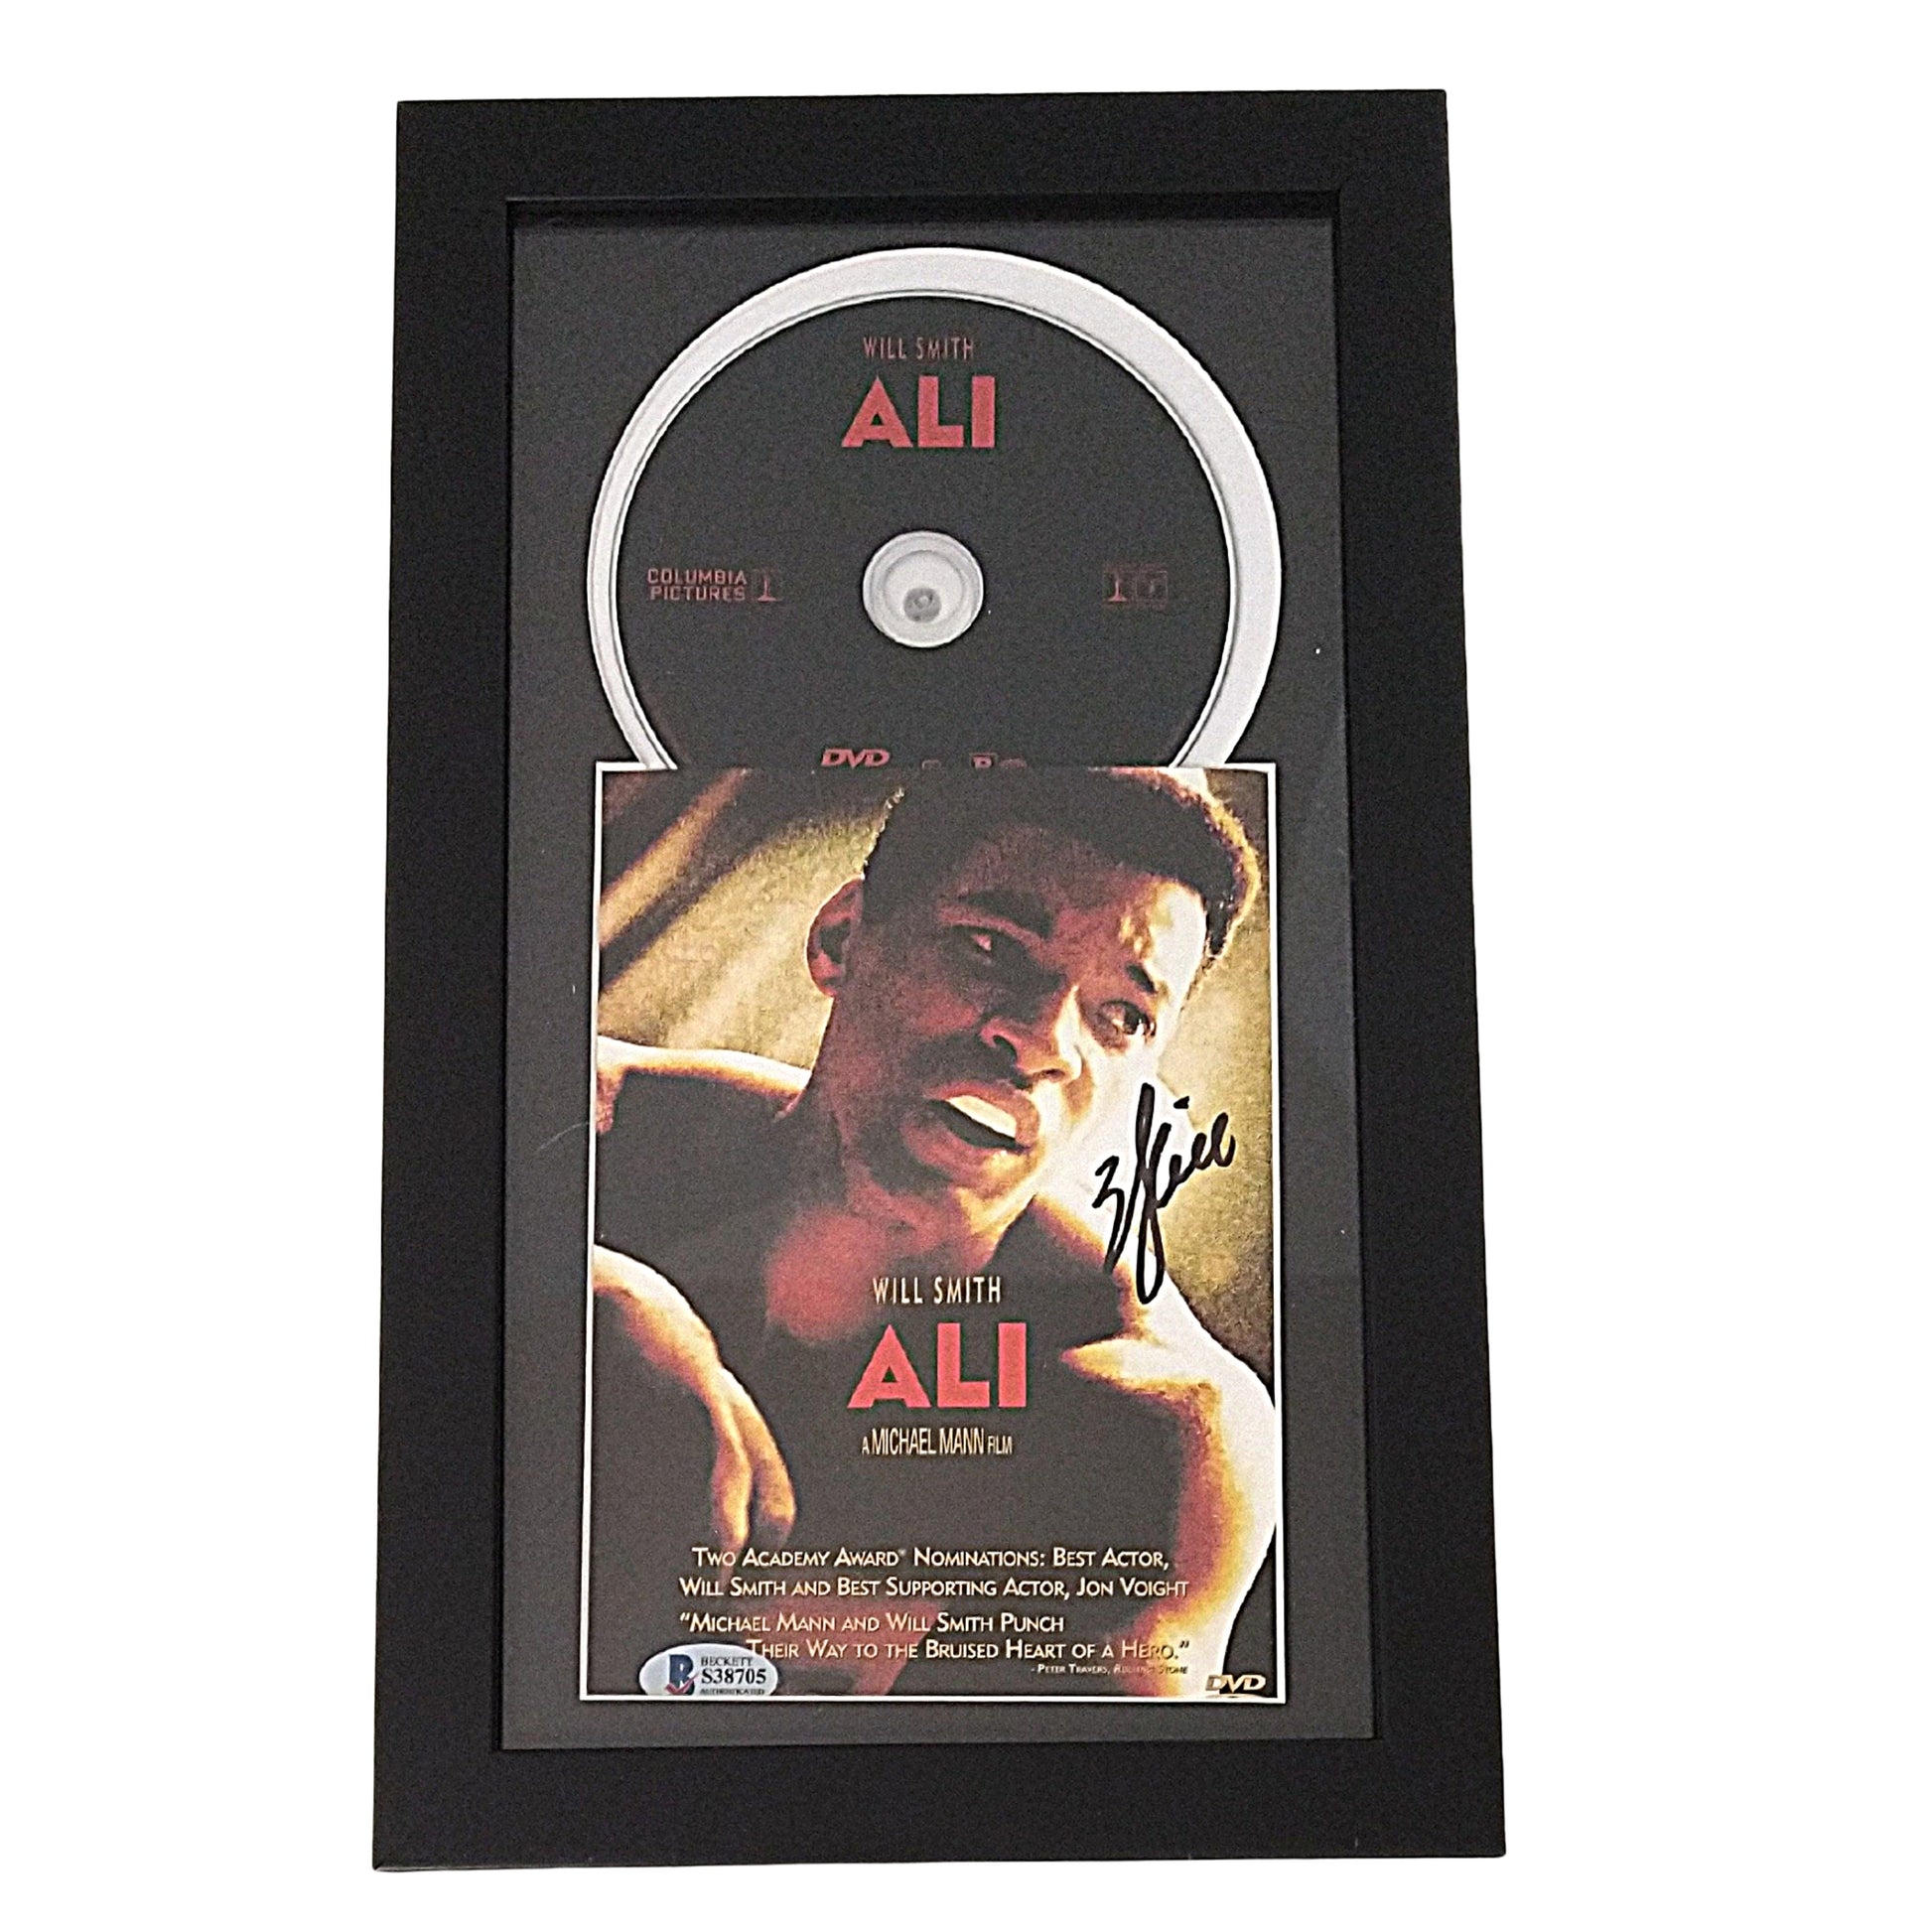 Hollywood- Autographed- Will Smith Signed 'Ali' Movie DVD Cover with Disc - Framed and Matted- Muhammed Ali Collectibles - Beckett Authentication BAS